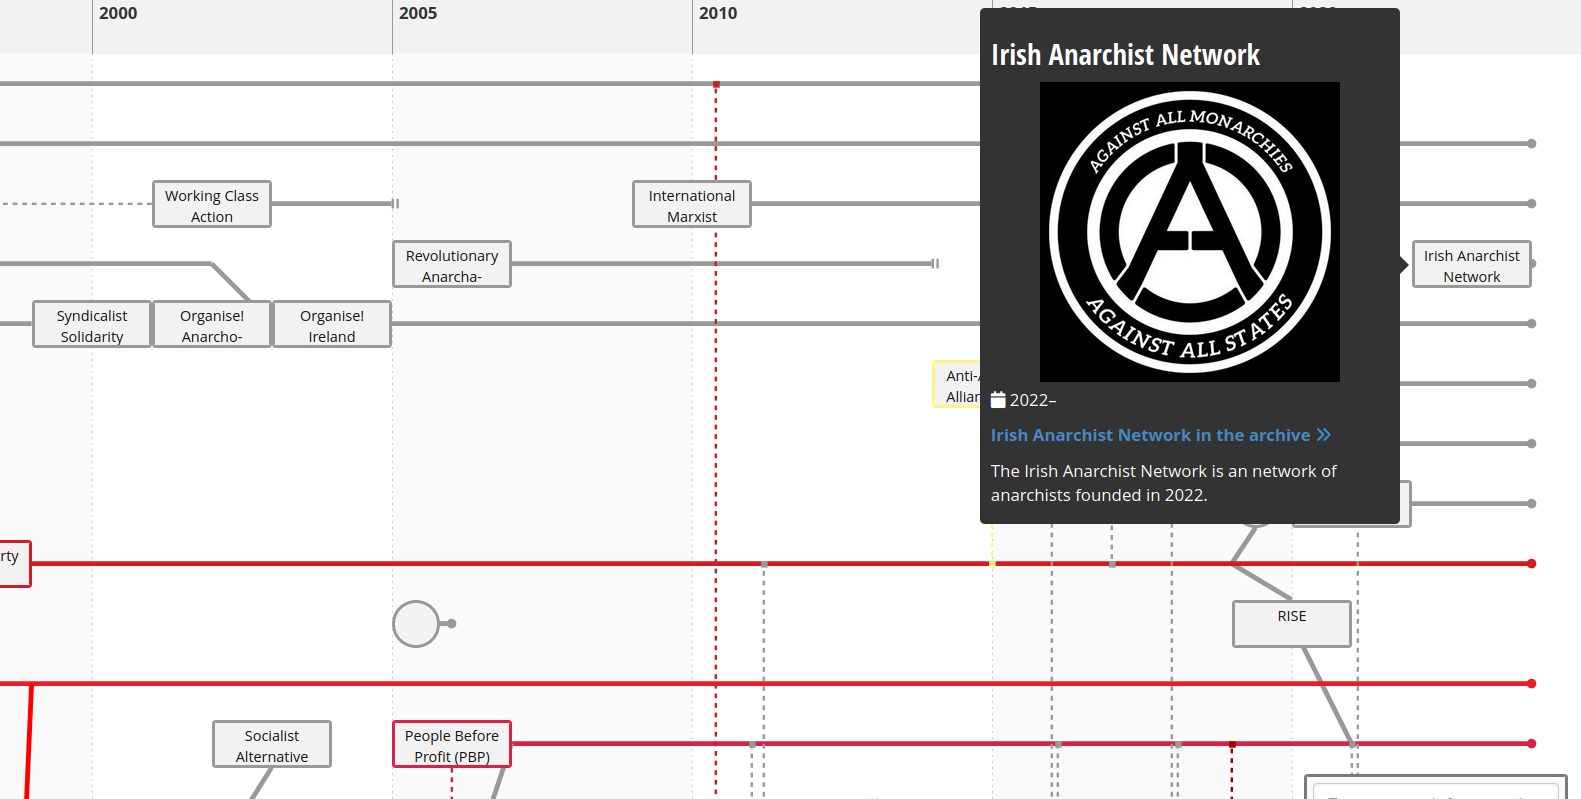 A screenshot of a section of the Timeline of the Irish Left diagram showing anarchist organisations from 2000 onwards, with an information card open and showing the Irish Anarchist Network logo.